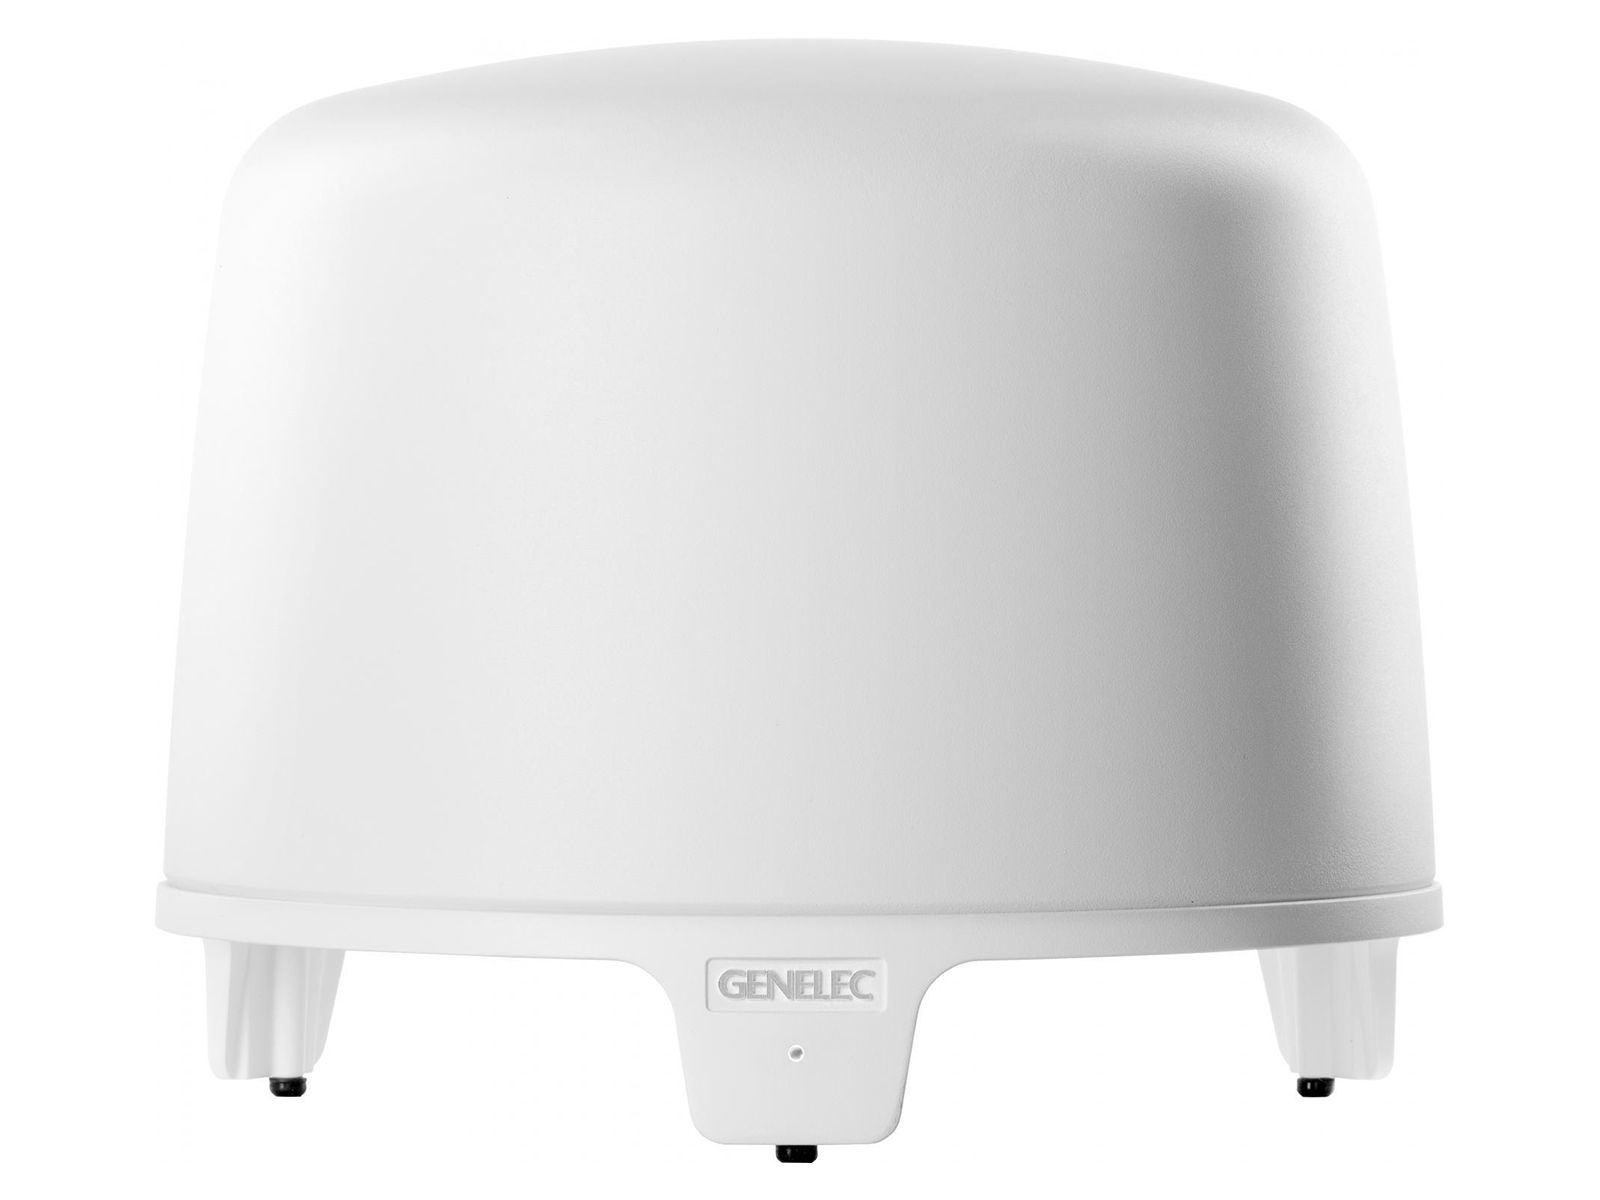 Genelec F1BWM | Home Subwoofer, 40W aktiv, 6.5", weiss, Cinch, S/PDIF, ISS, Bass Mgmt, Remote